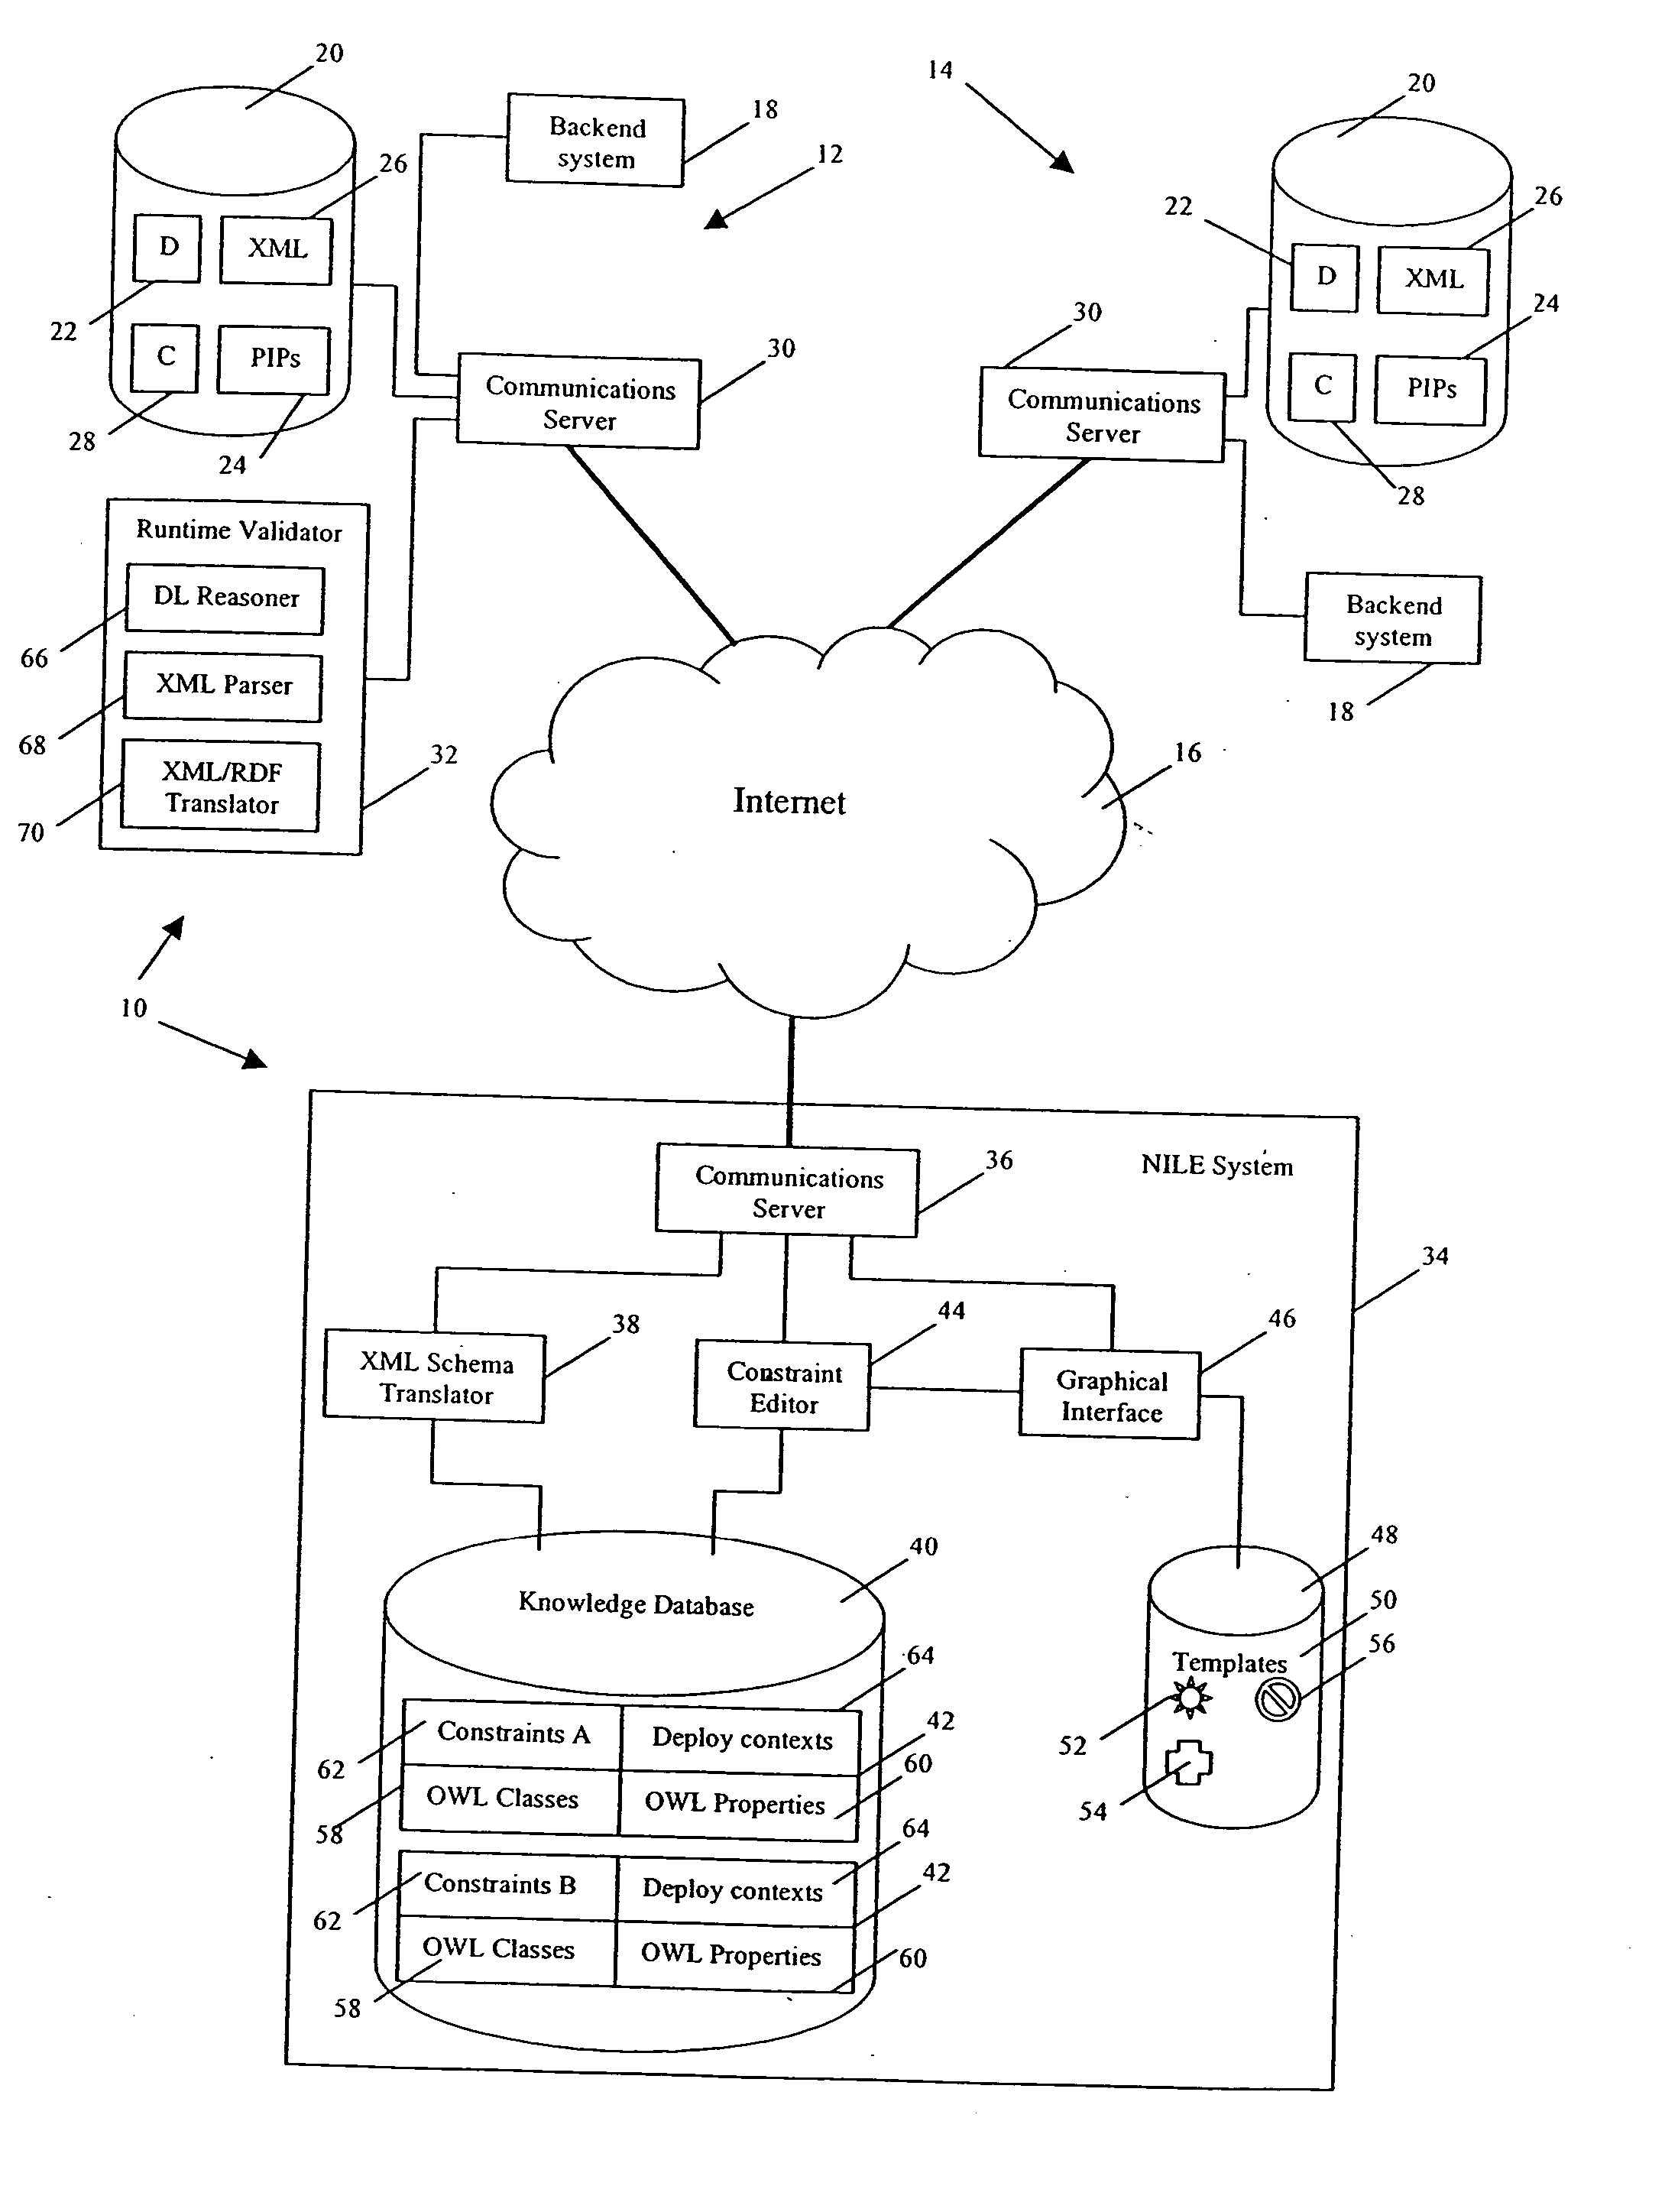 Method and system for integrating interaction protocols between two entities